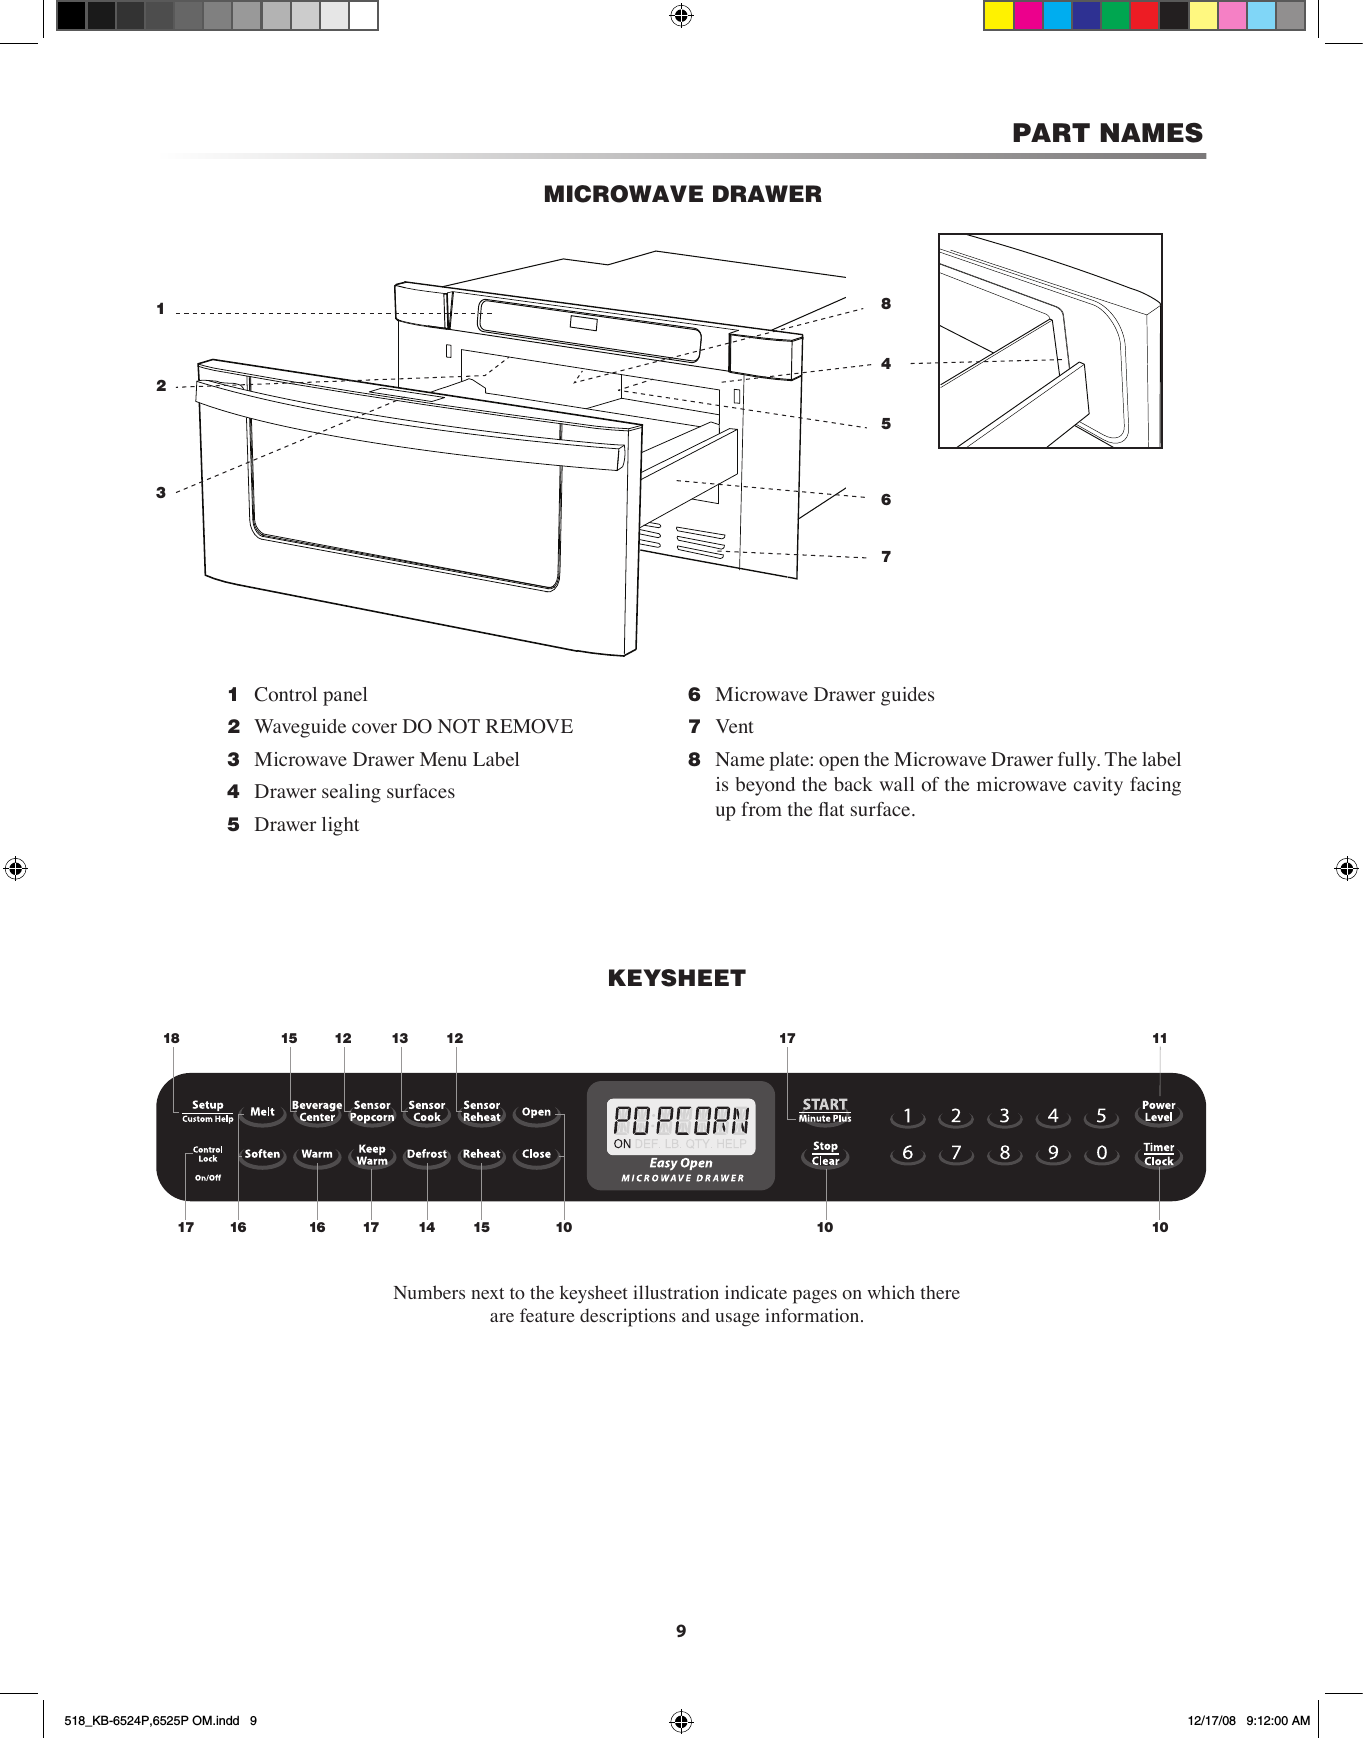 9PART NAMESMICROWAVE DRAWER21854376KEYSHEETNumbers next to the keysheet illustration indicate pages on which there are feature descriptions and usage information. 1 Control panel 2 Waveguide cover DO NOT REMOVE  3 Microwave Drawer Menu Label  4 Drawer sealing surfaces 5 Drawer light  6 Microwave Drawer guides 7 Vent 8 Name plate: open the Microwave Drawer fully. The label is beyond the back wall of the microwave cavity facing up from the at surface.12151814 1017 15 101617 1110171613 12518_KB-6524P,6525P OM.indd   9 12/17/08   9:12:00 AM